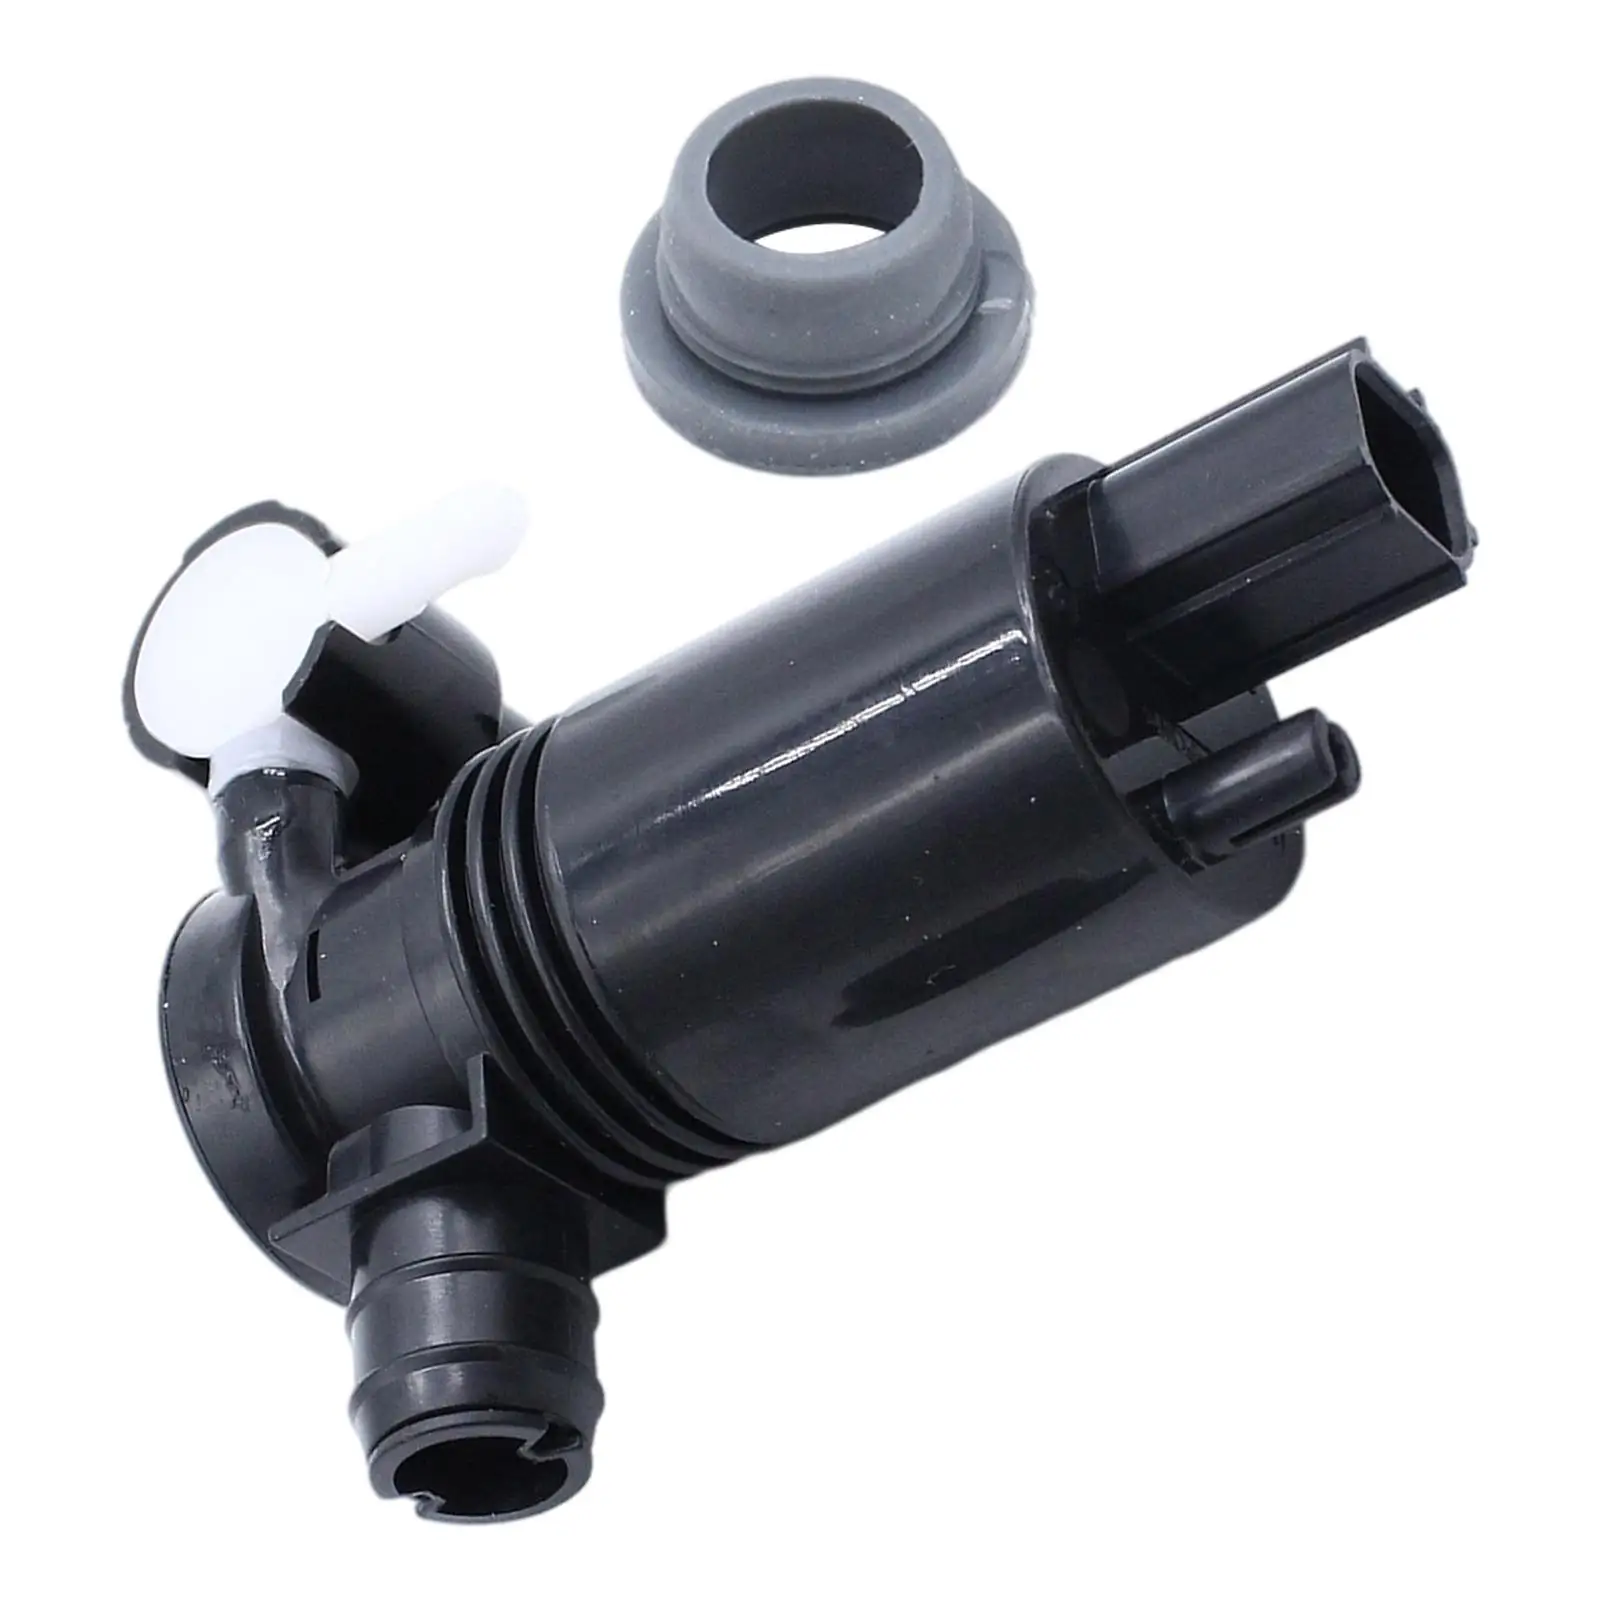 Windshield Washer Pump with Grommet Motor Jet 1014003 Fluid Pump Replace for Ford Fiesta MK6 02-15 Car